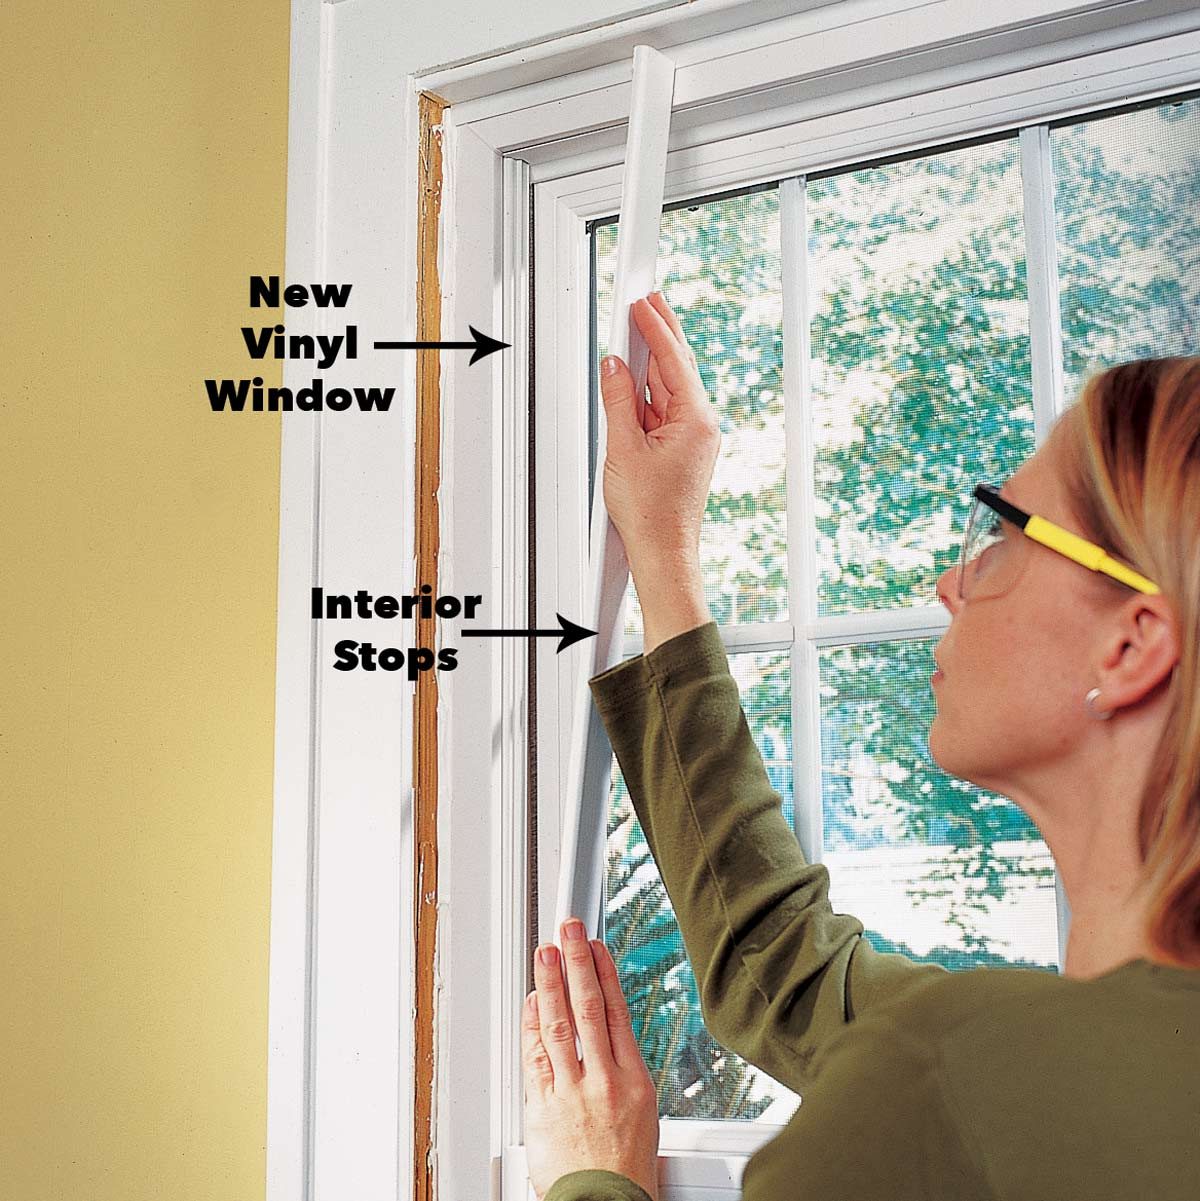 How To Install A Window